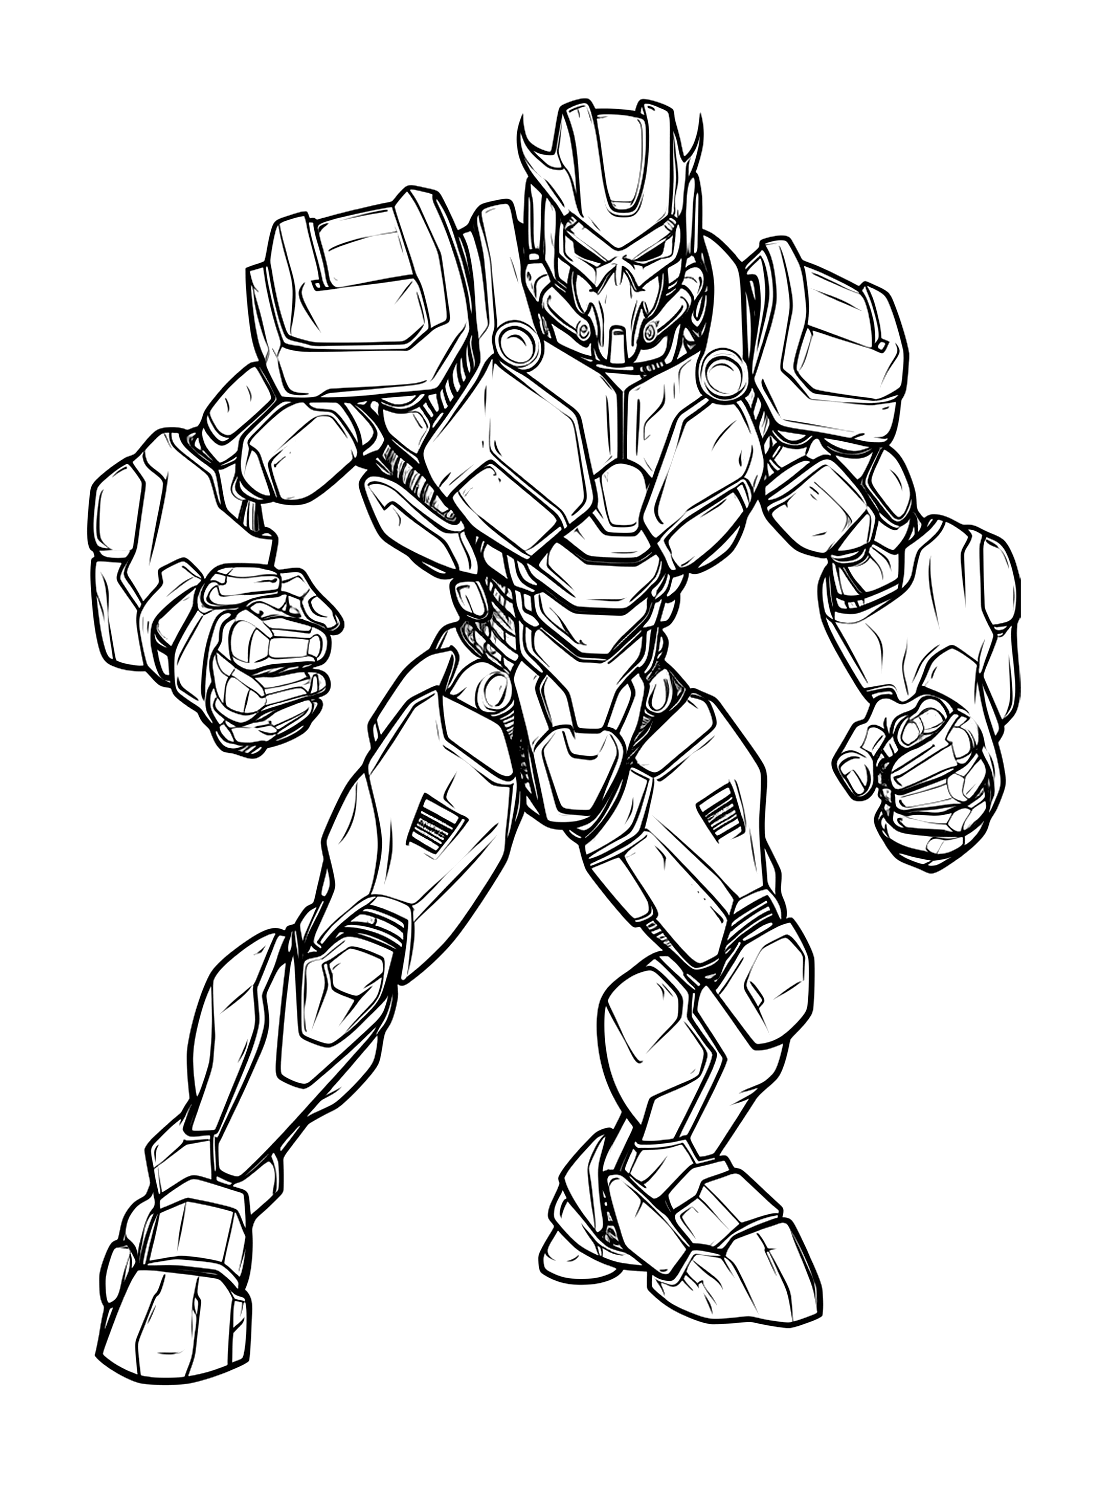 Bumblebee Coloring Page